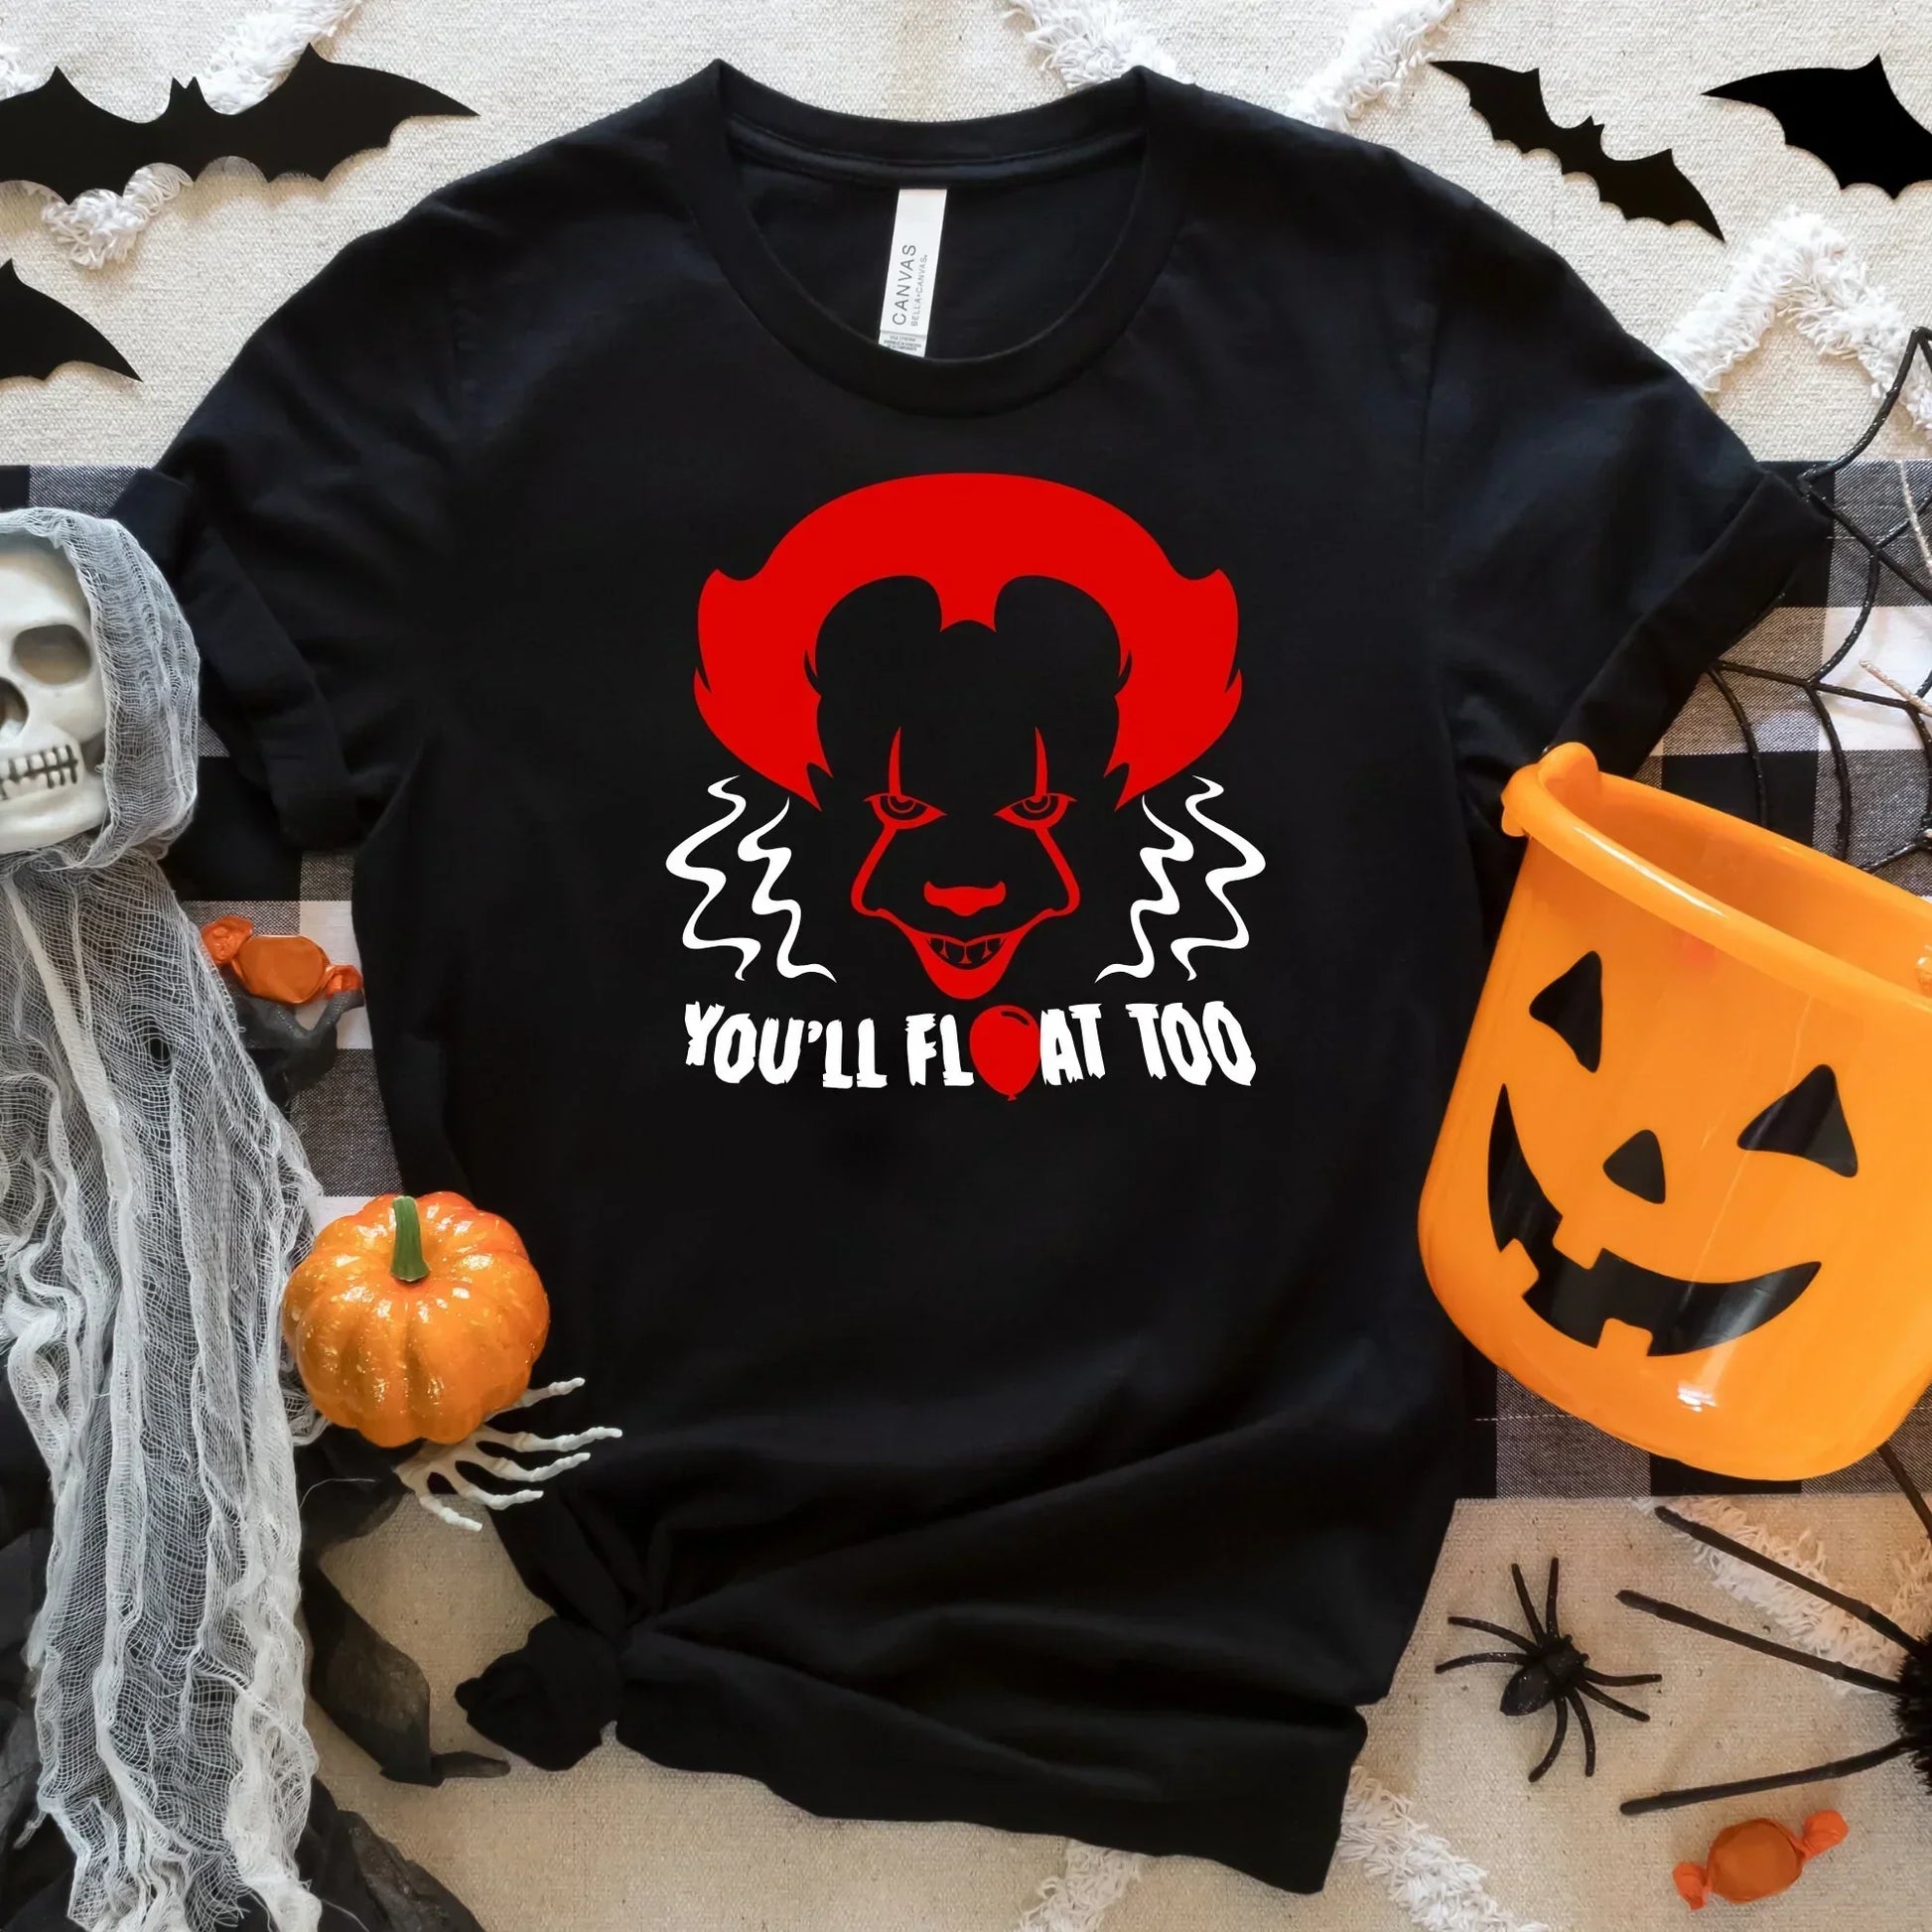 Horror Movie Sweatshirt, Pennywise Shirt, IT Tshirt, Halloween Crewneck, Trick or Treat, Cute Party T-Shirt, Gift for Her, Gift for Him HMDesignStudioUS